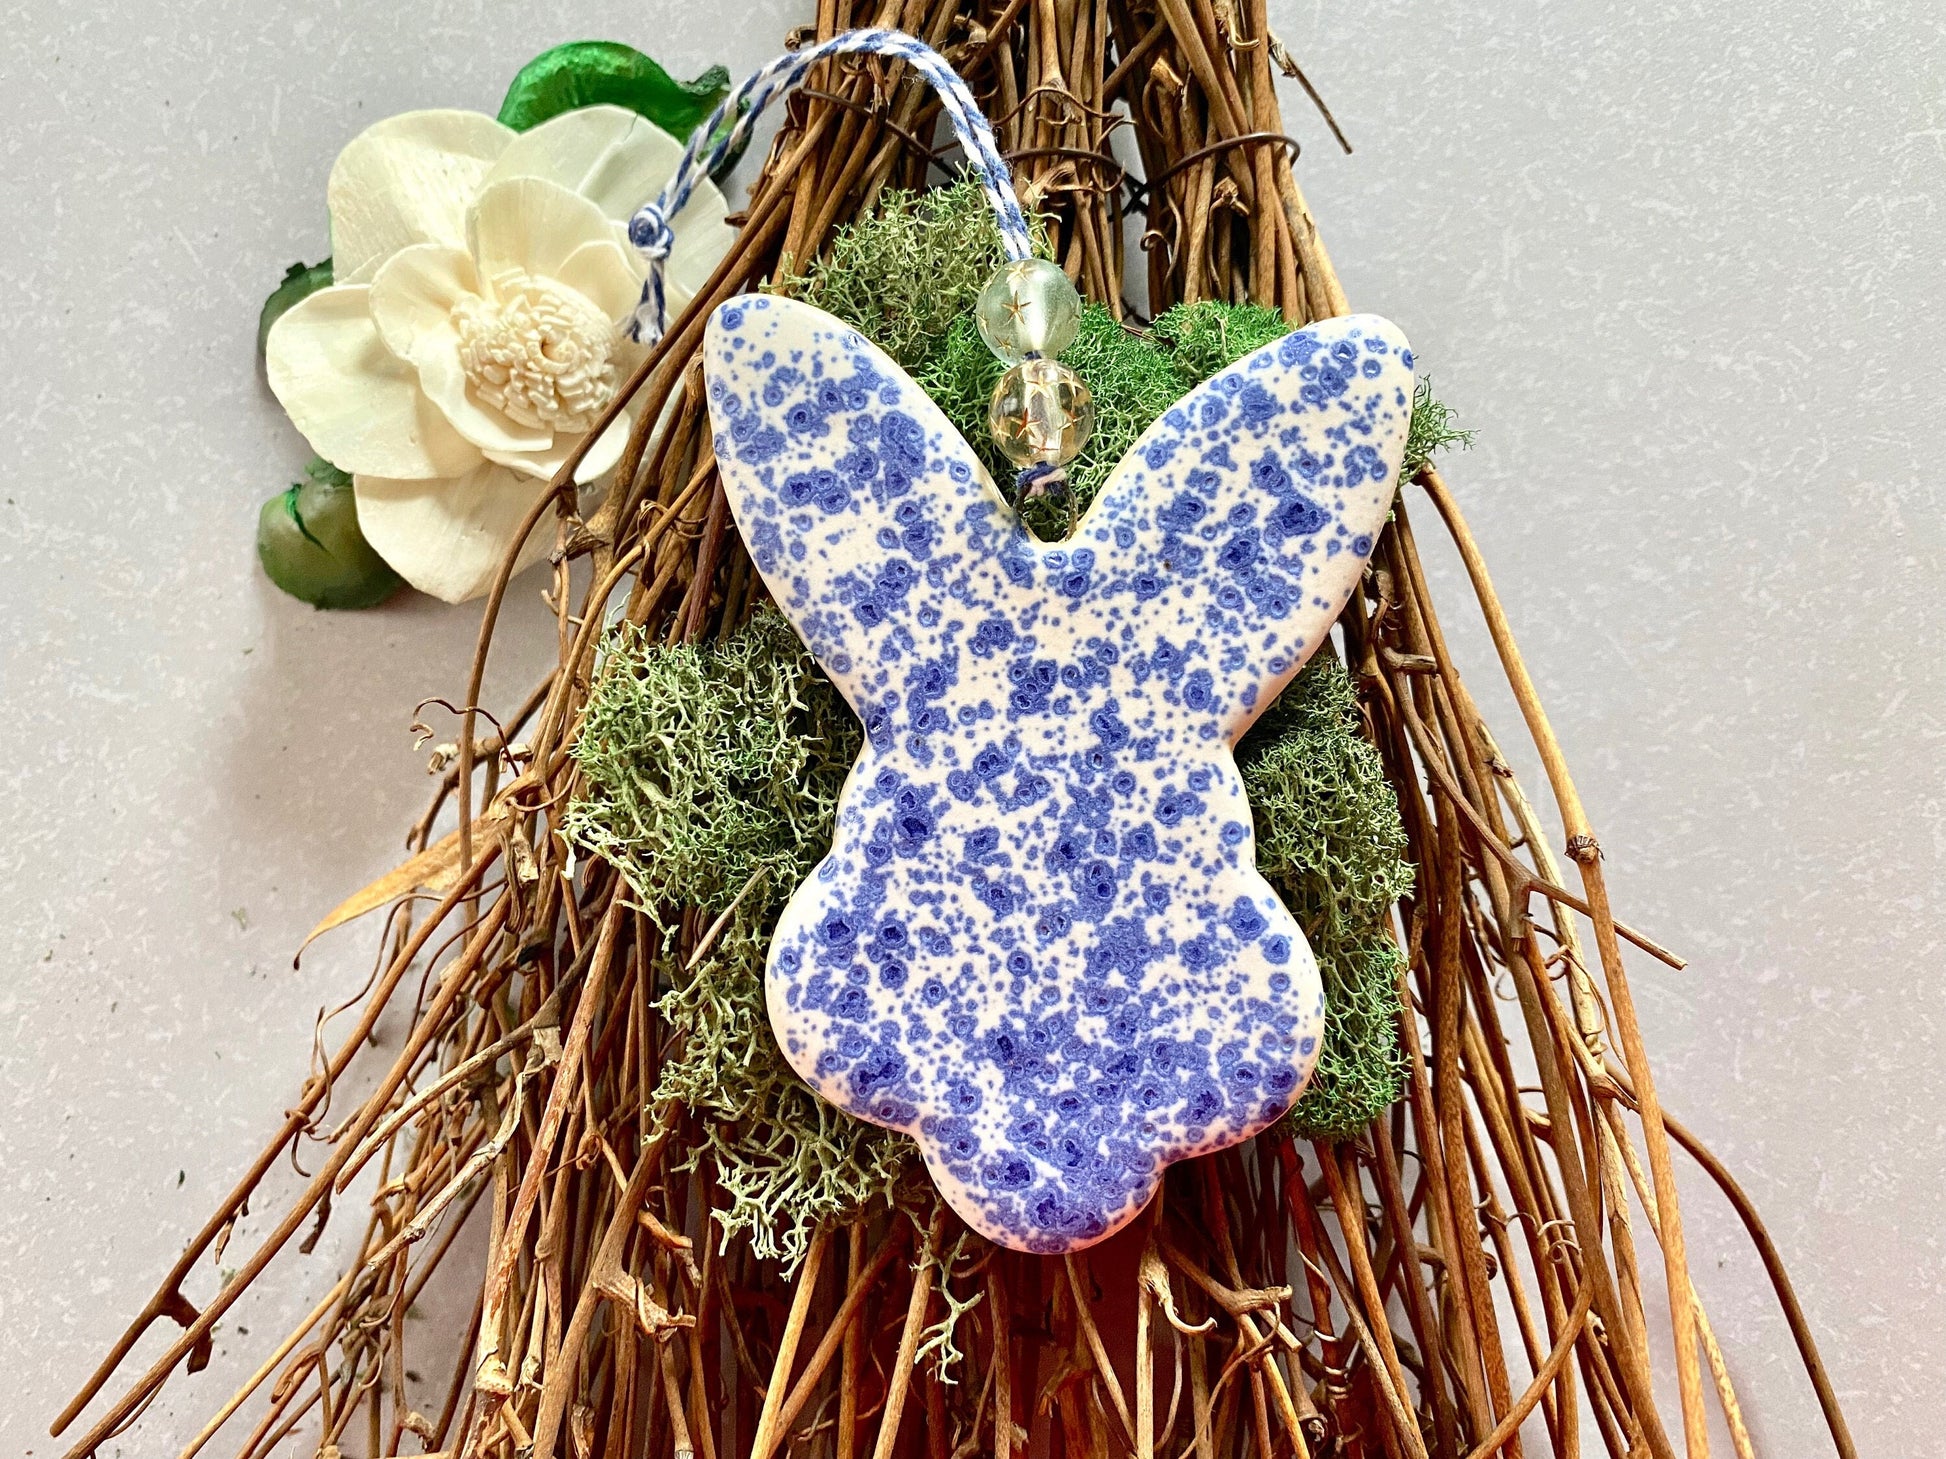 Handmade ceramic rabbit ornament. Ostara decoration. Easter bunny ornament. Blue white speckled Easter wall hanging. Year of the Rabbit gift